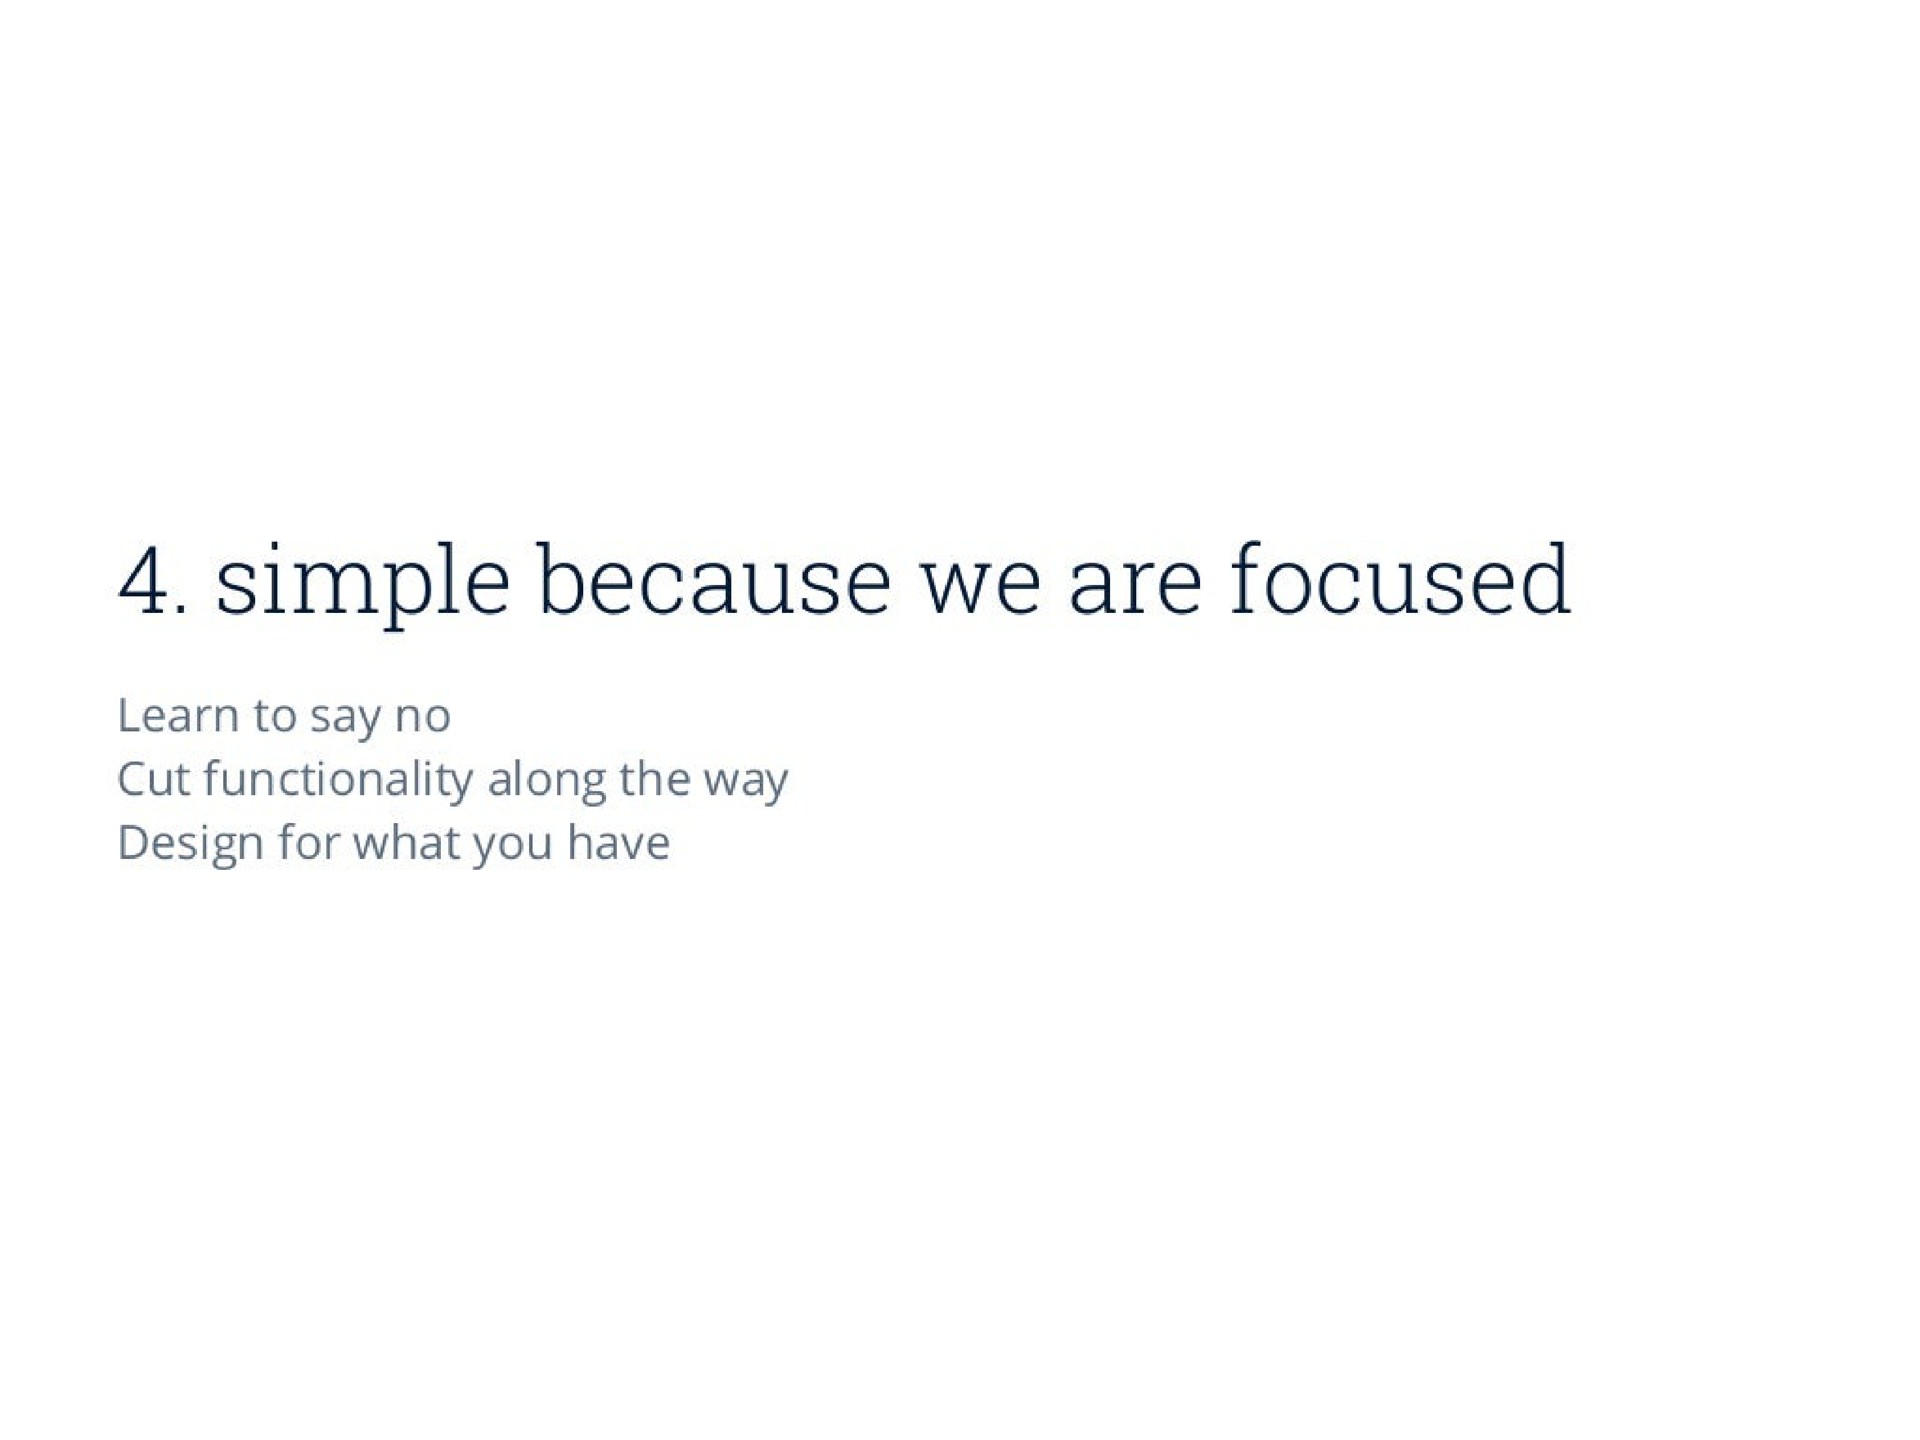 simple because we are focused learn to say no cut functionality along the way design for what you have | Oscar Health